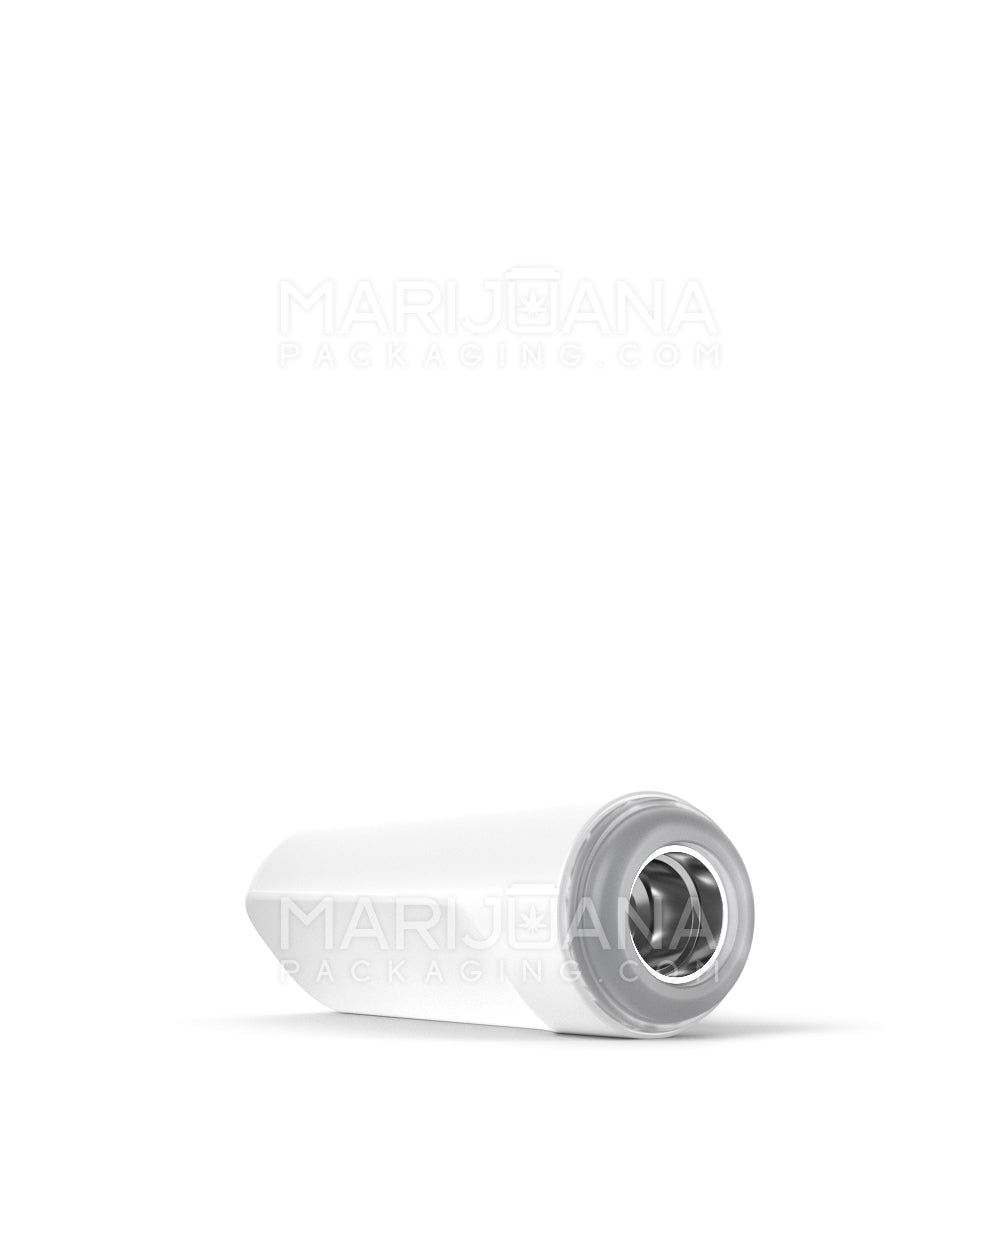 RAE | Flat Vape Mouthpiece for Screw On Plastic Cartridges | White Plastic - Screw On - 400 Count